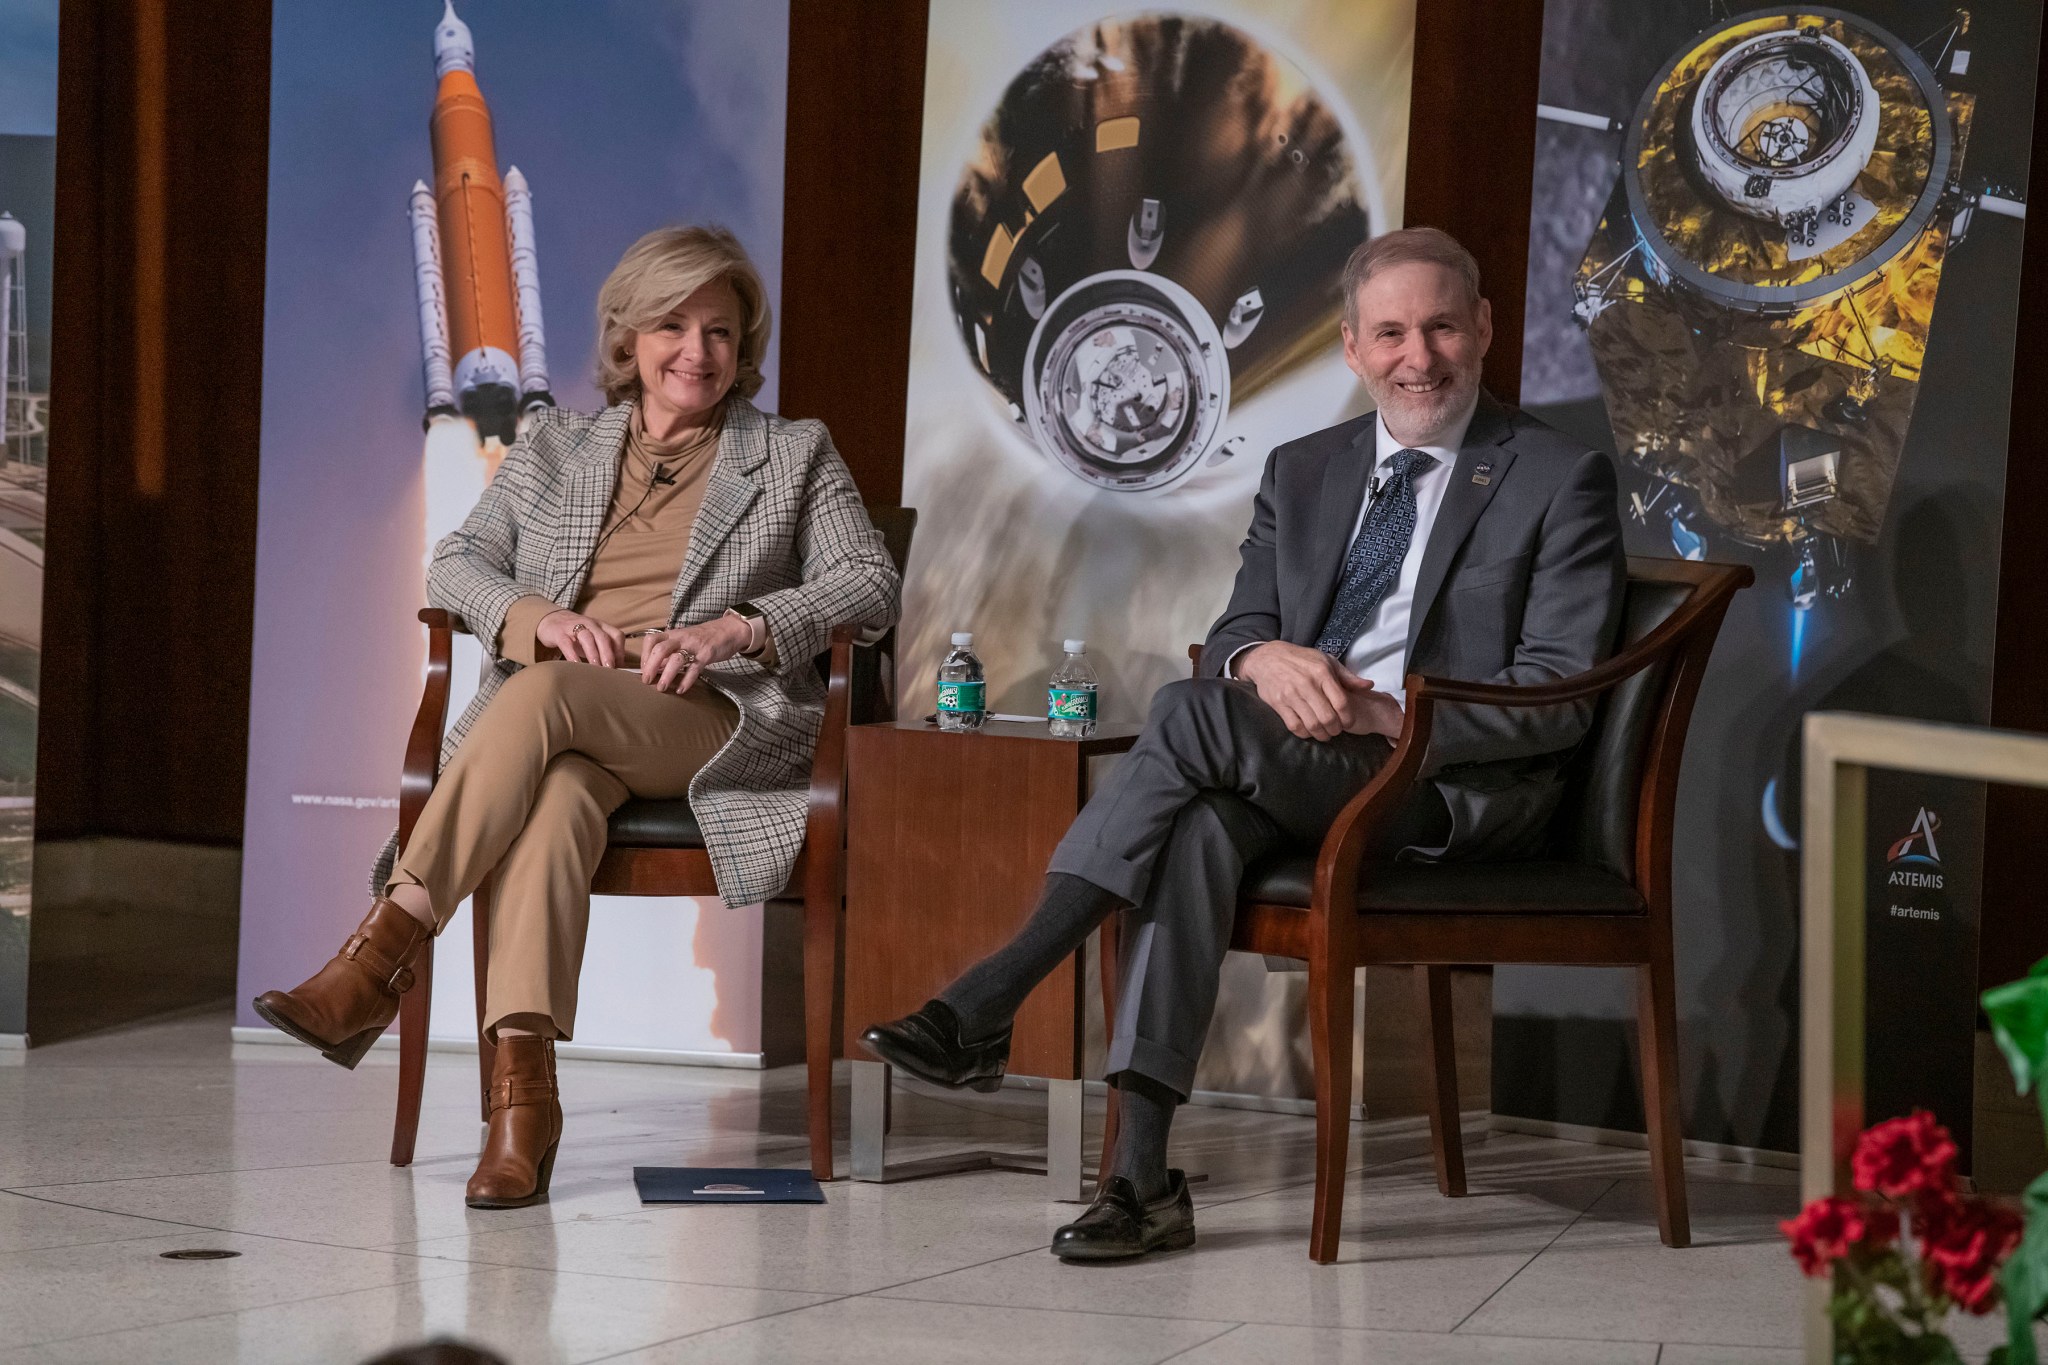 Douglas Loverro, NASA’s new associate administrator for the Human Exploration and Operations Mission Directorate, right.